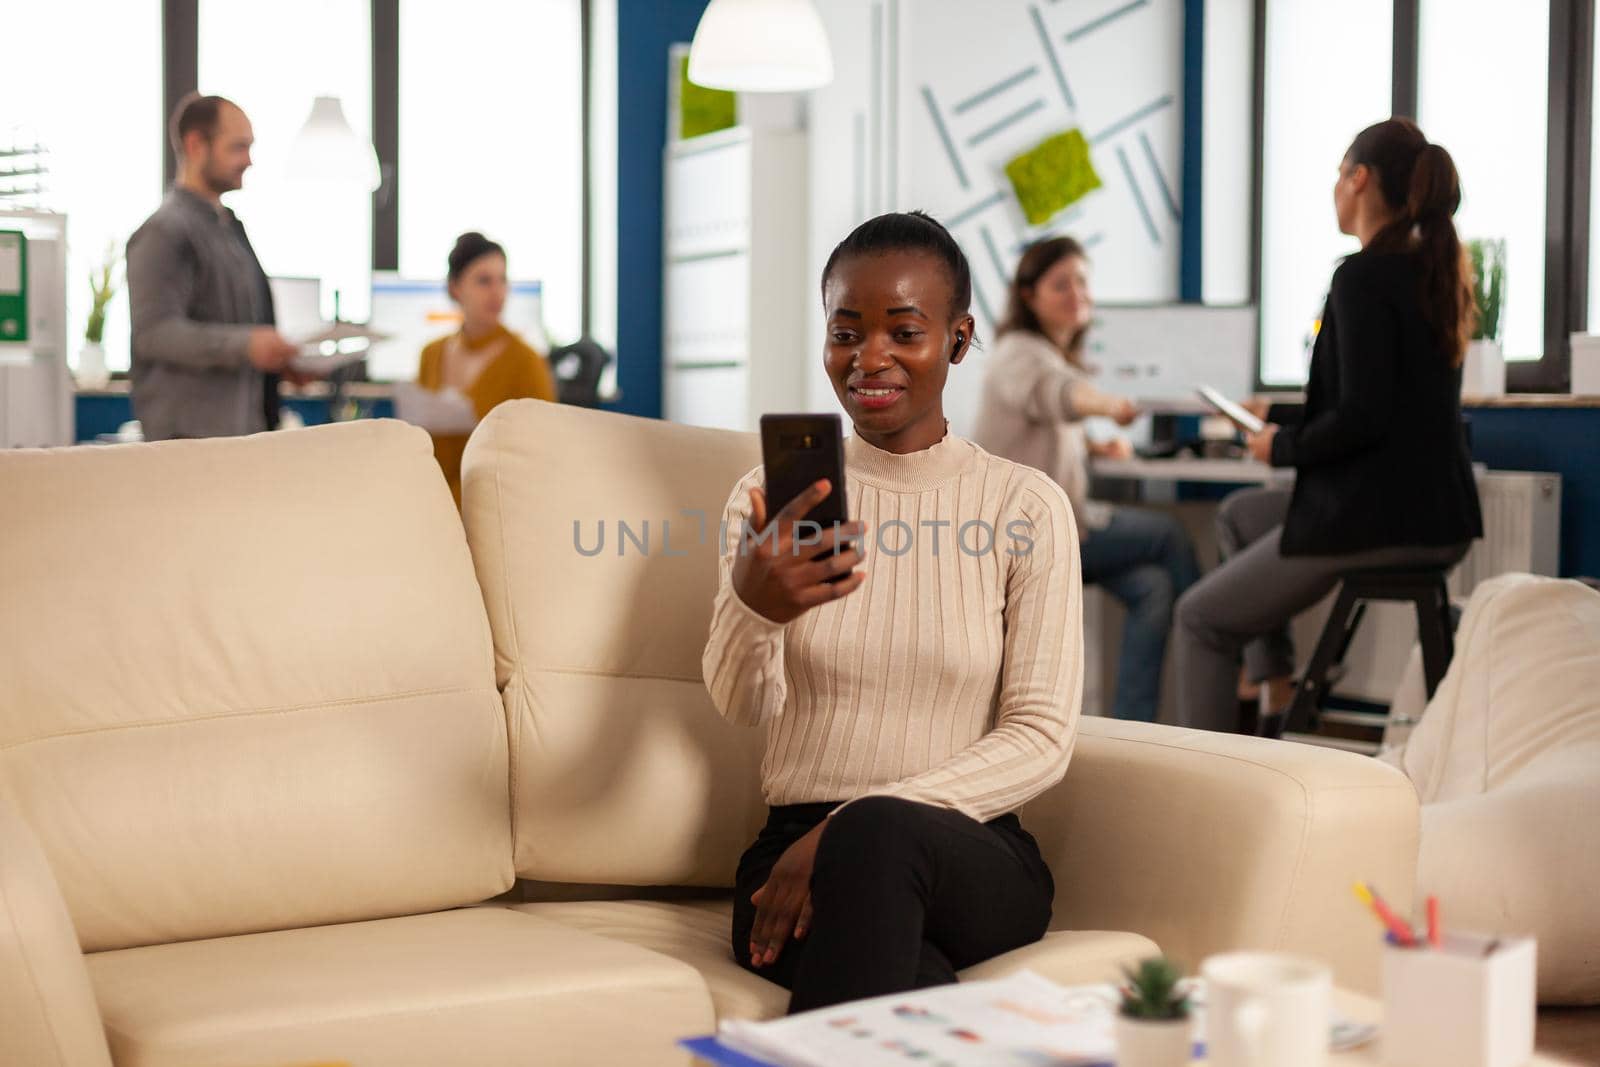 African manager woman discussing with remote colleagues on video call holding smartphone using headphones sitting on couch in business modern office. Diverse coworkers planning new financial project